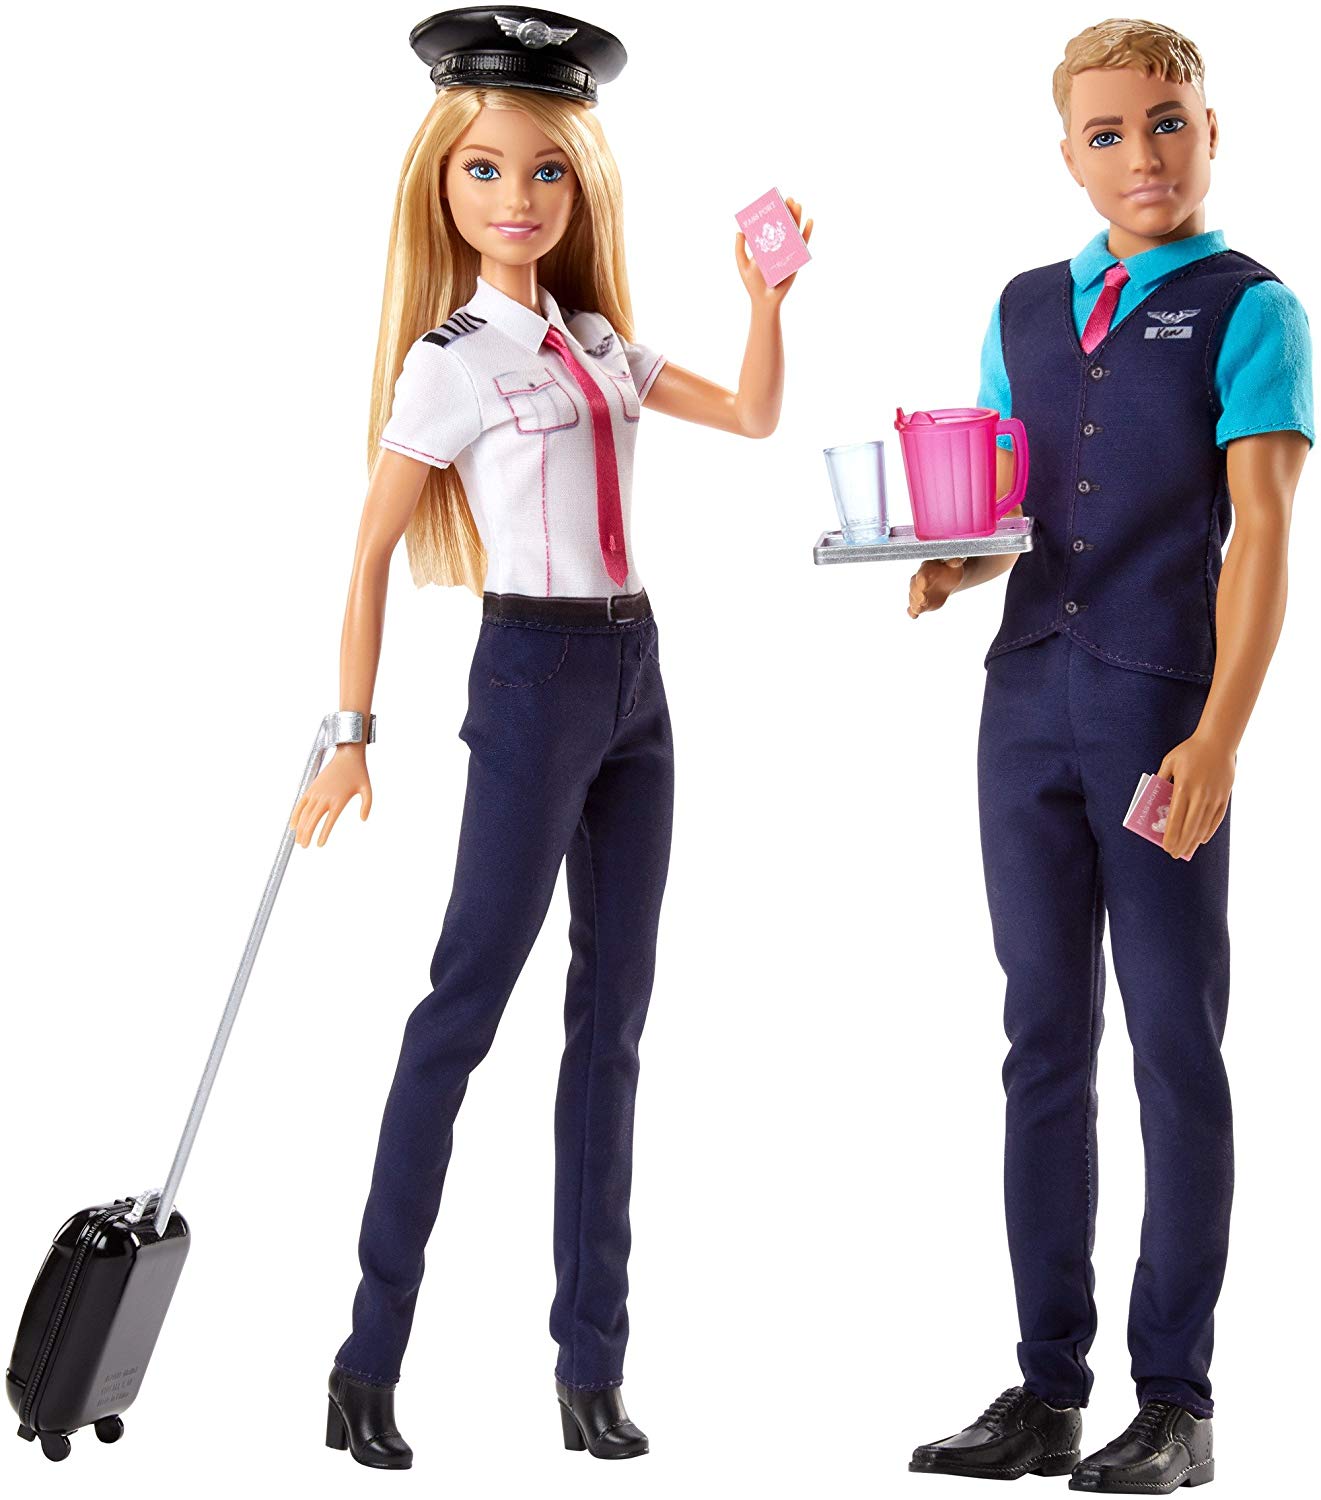 Barbie Pink Passport Pilot Doll And Accessory Set – 2 Pack